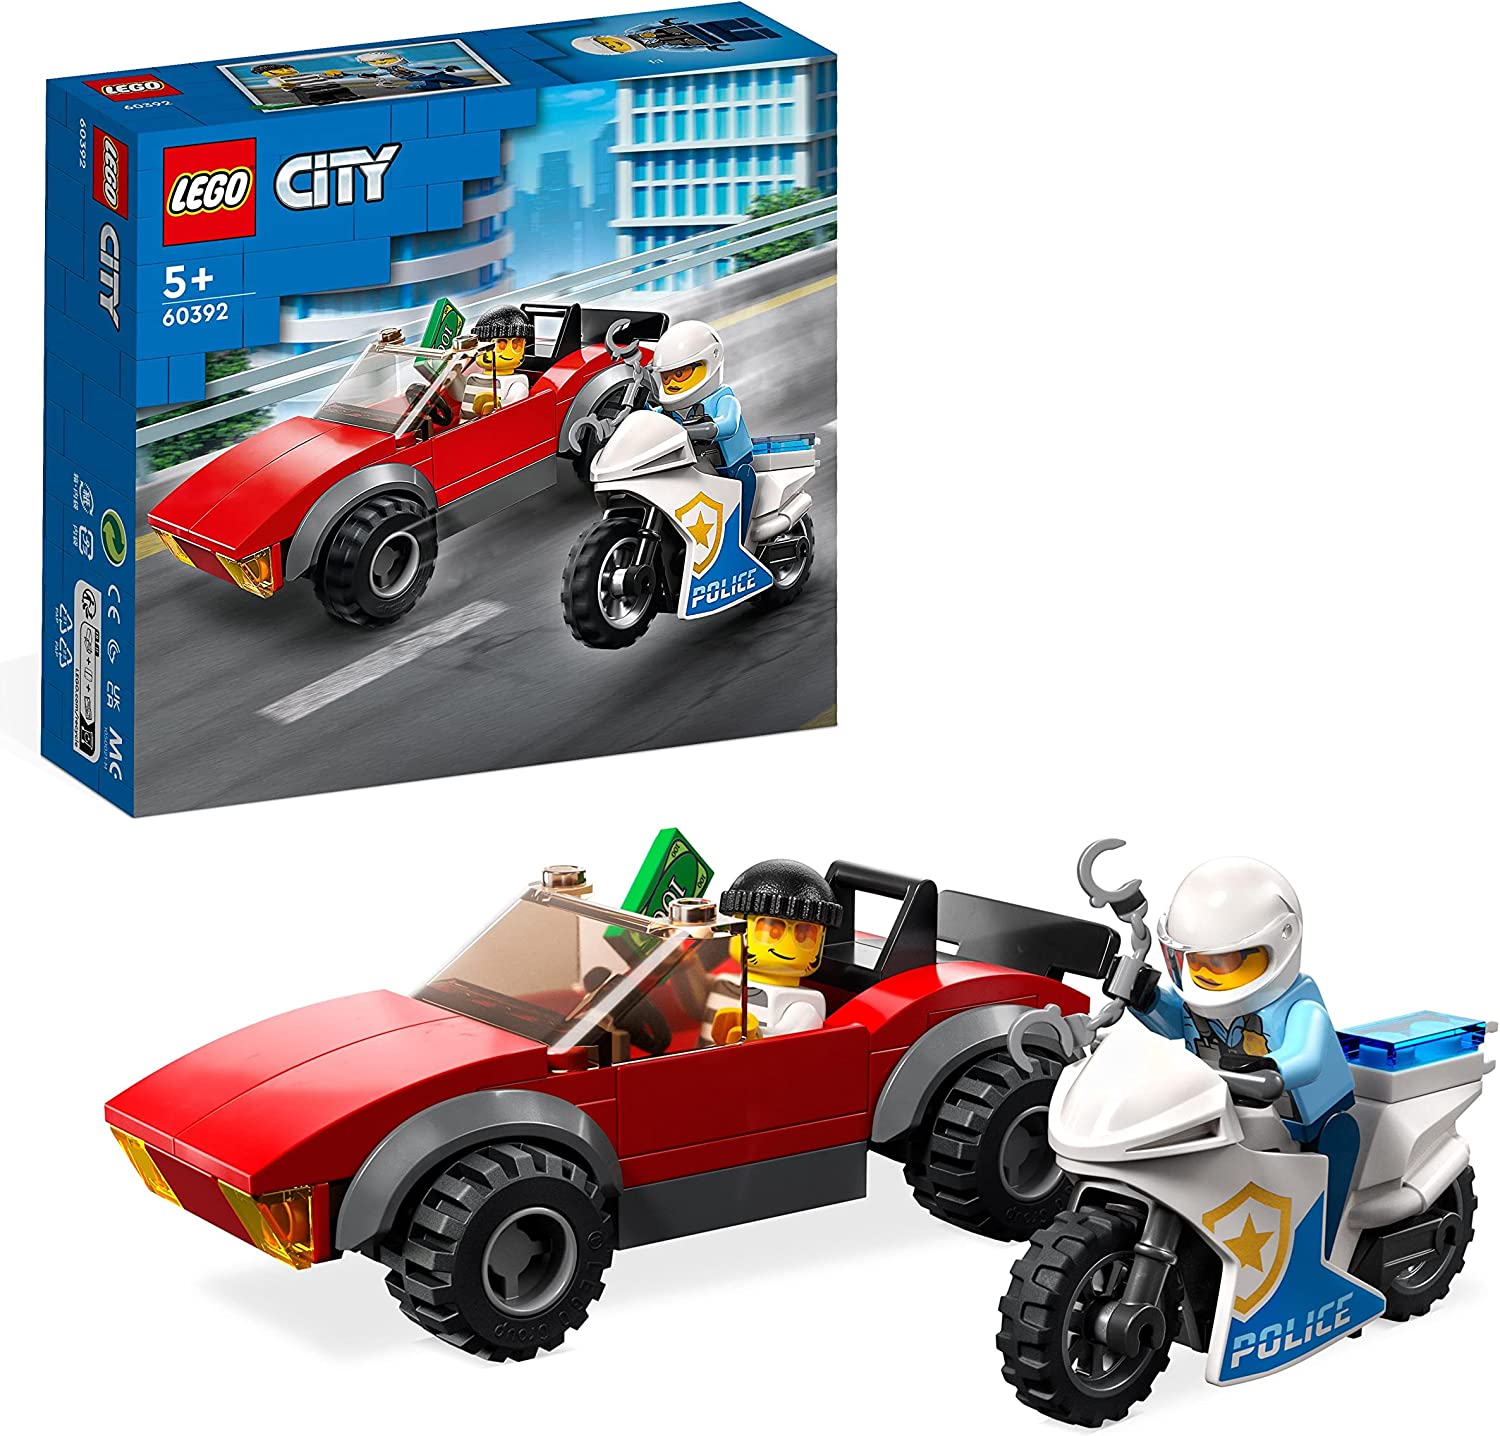 LEGO 60392 City Police Chase with Police Motorcycle Set, Racing Car Toy with Police Officer Mini Figure for Children from 5 Years